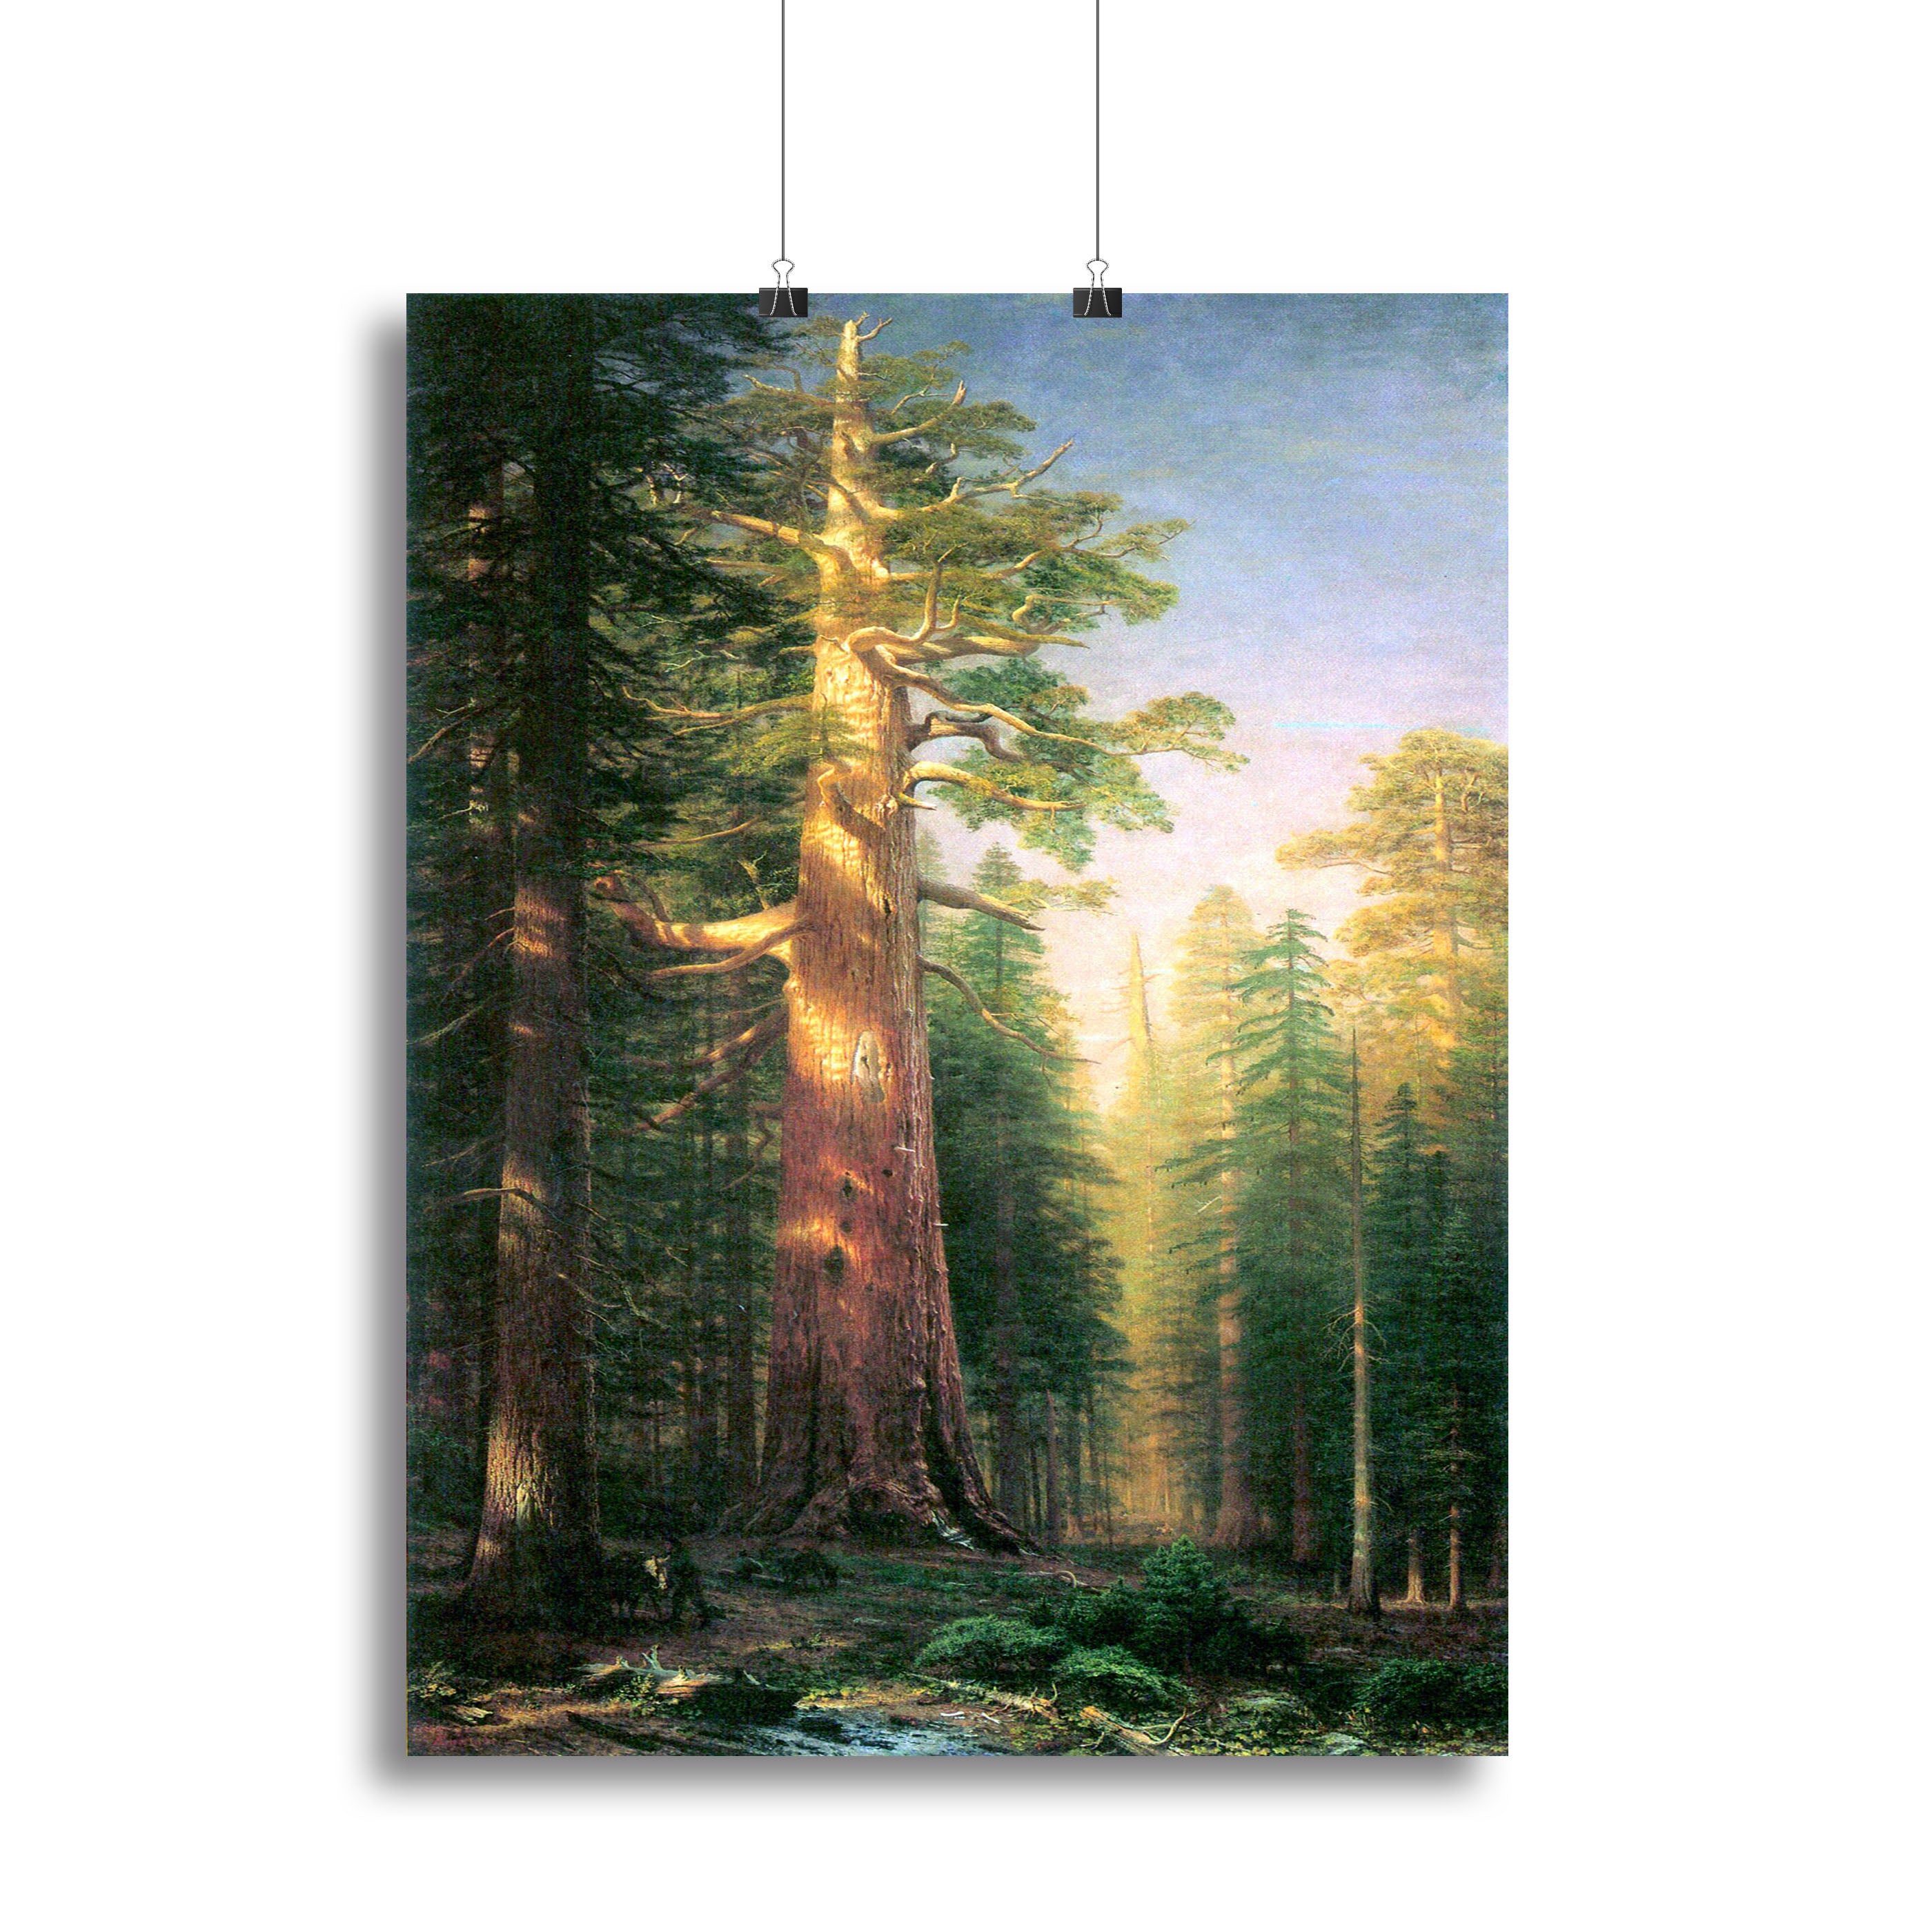 The big trees Mariposa Grove California by Bierstadt Canvas Print or Poster - Canvas Art Rocks - 2